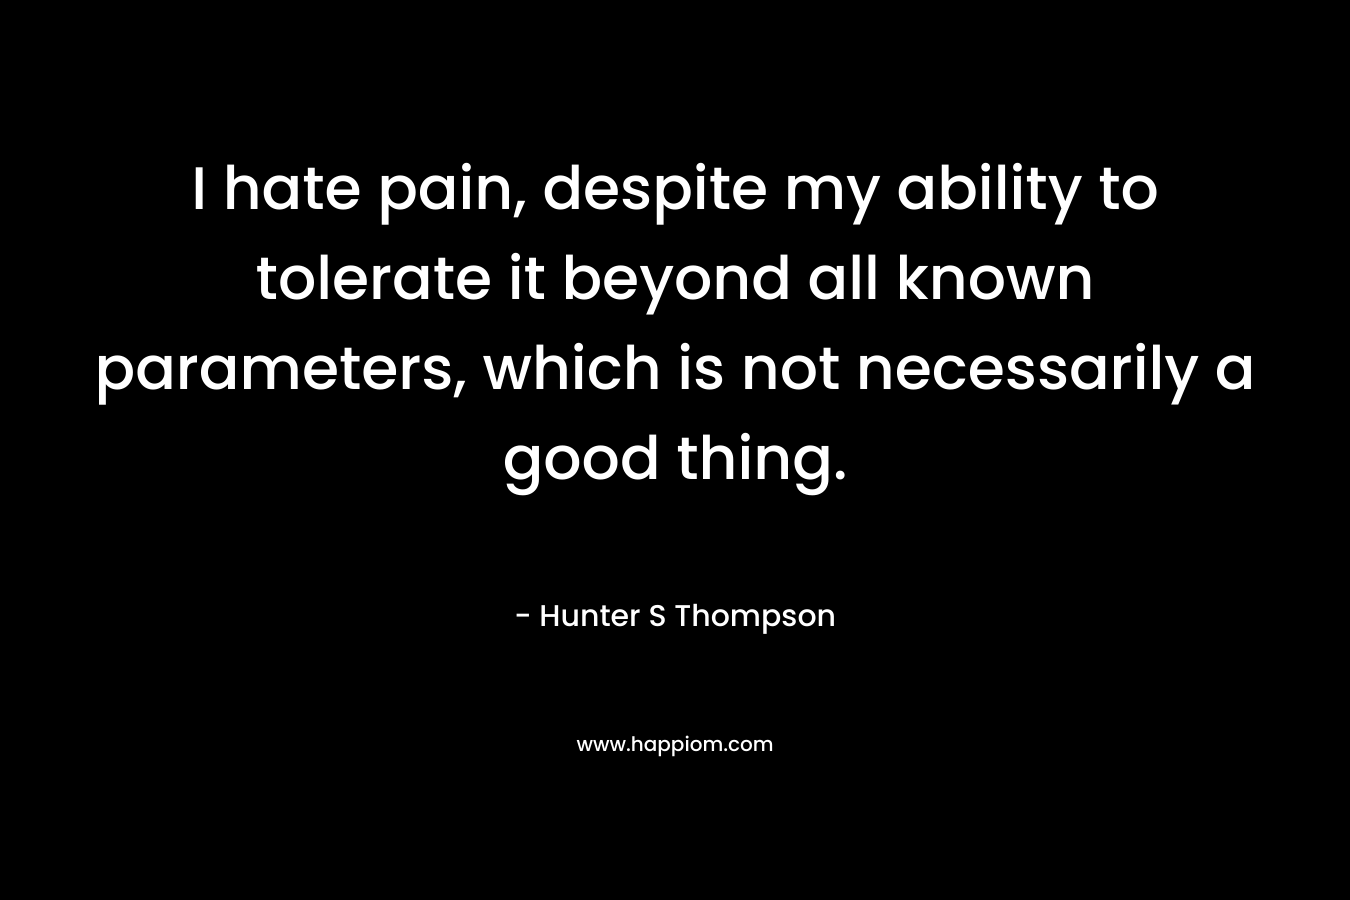 I hate pain, despite my ability to tolerate it beyond all known parameters, which is not necessarily a good thing.